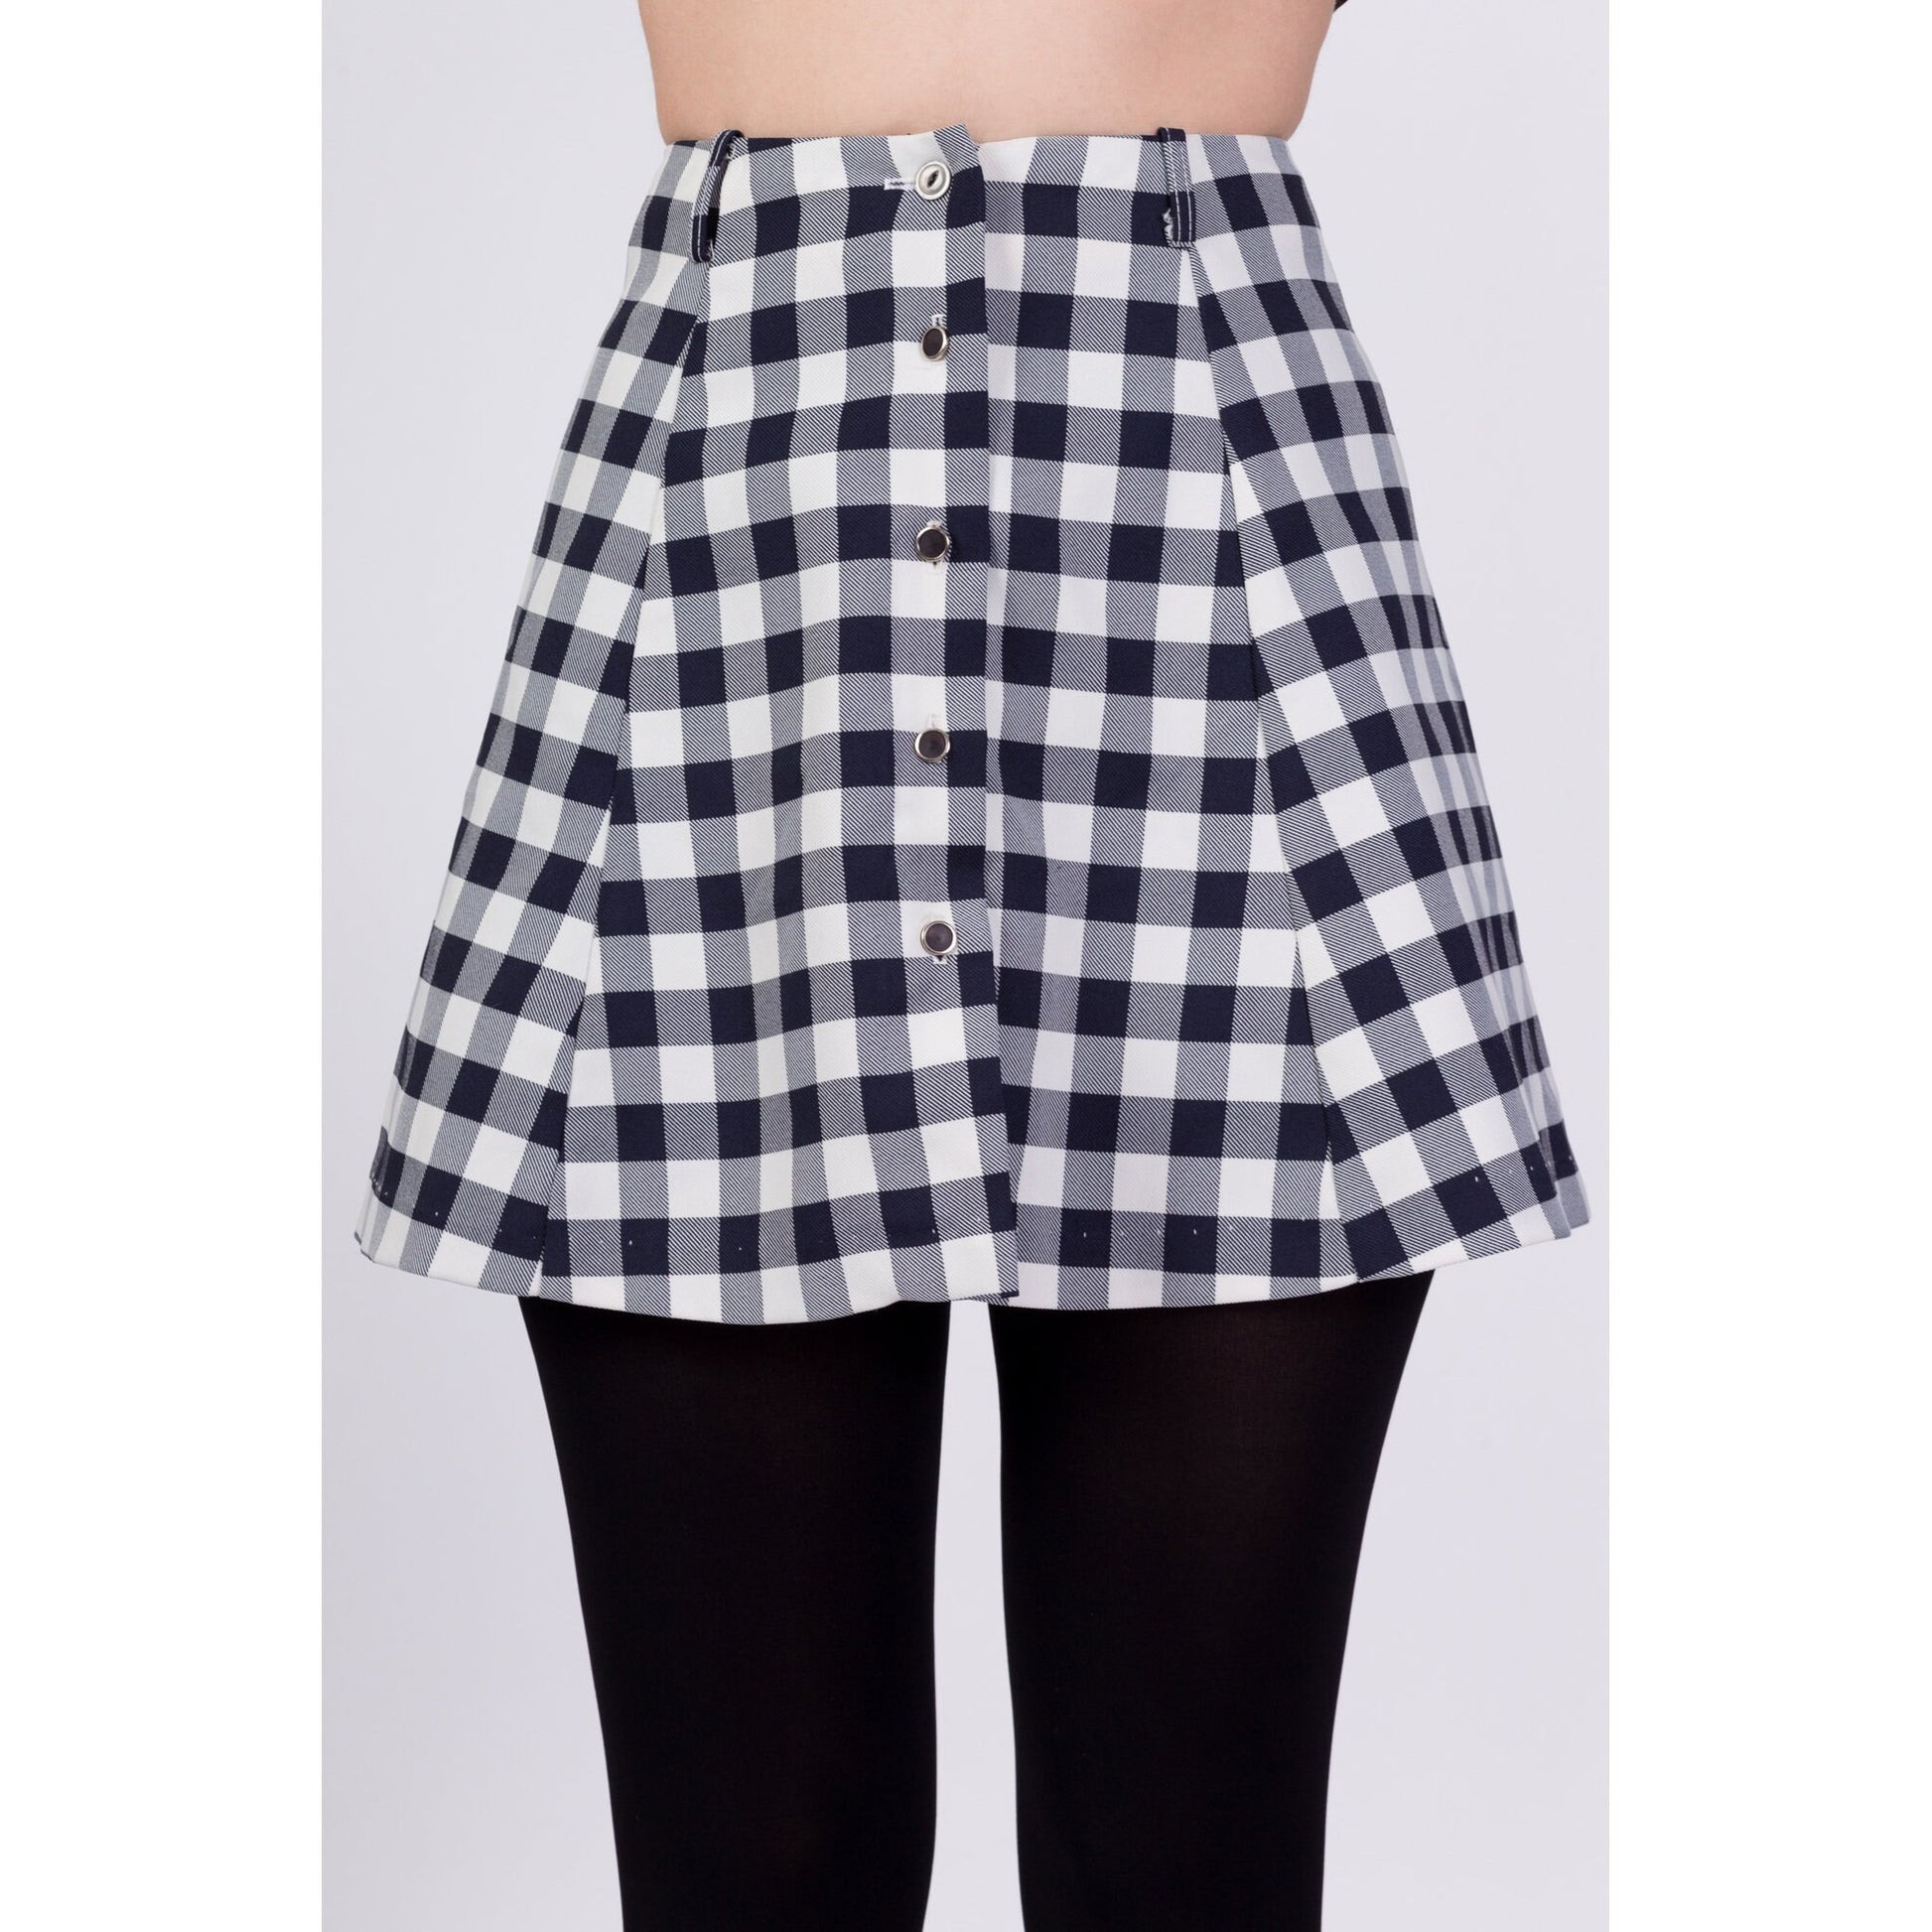 70s Gingham Button Front Mini Skirt - Extra Small, 23"